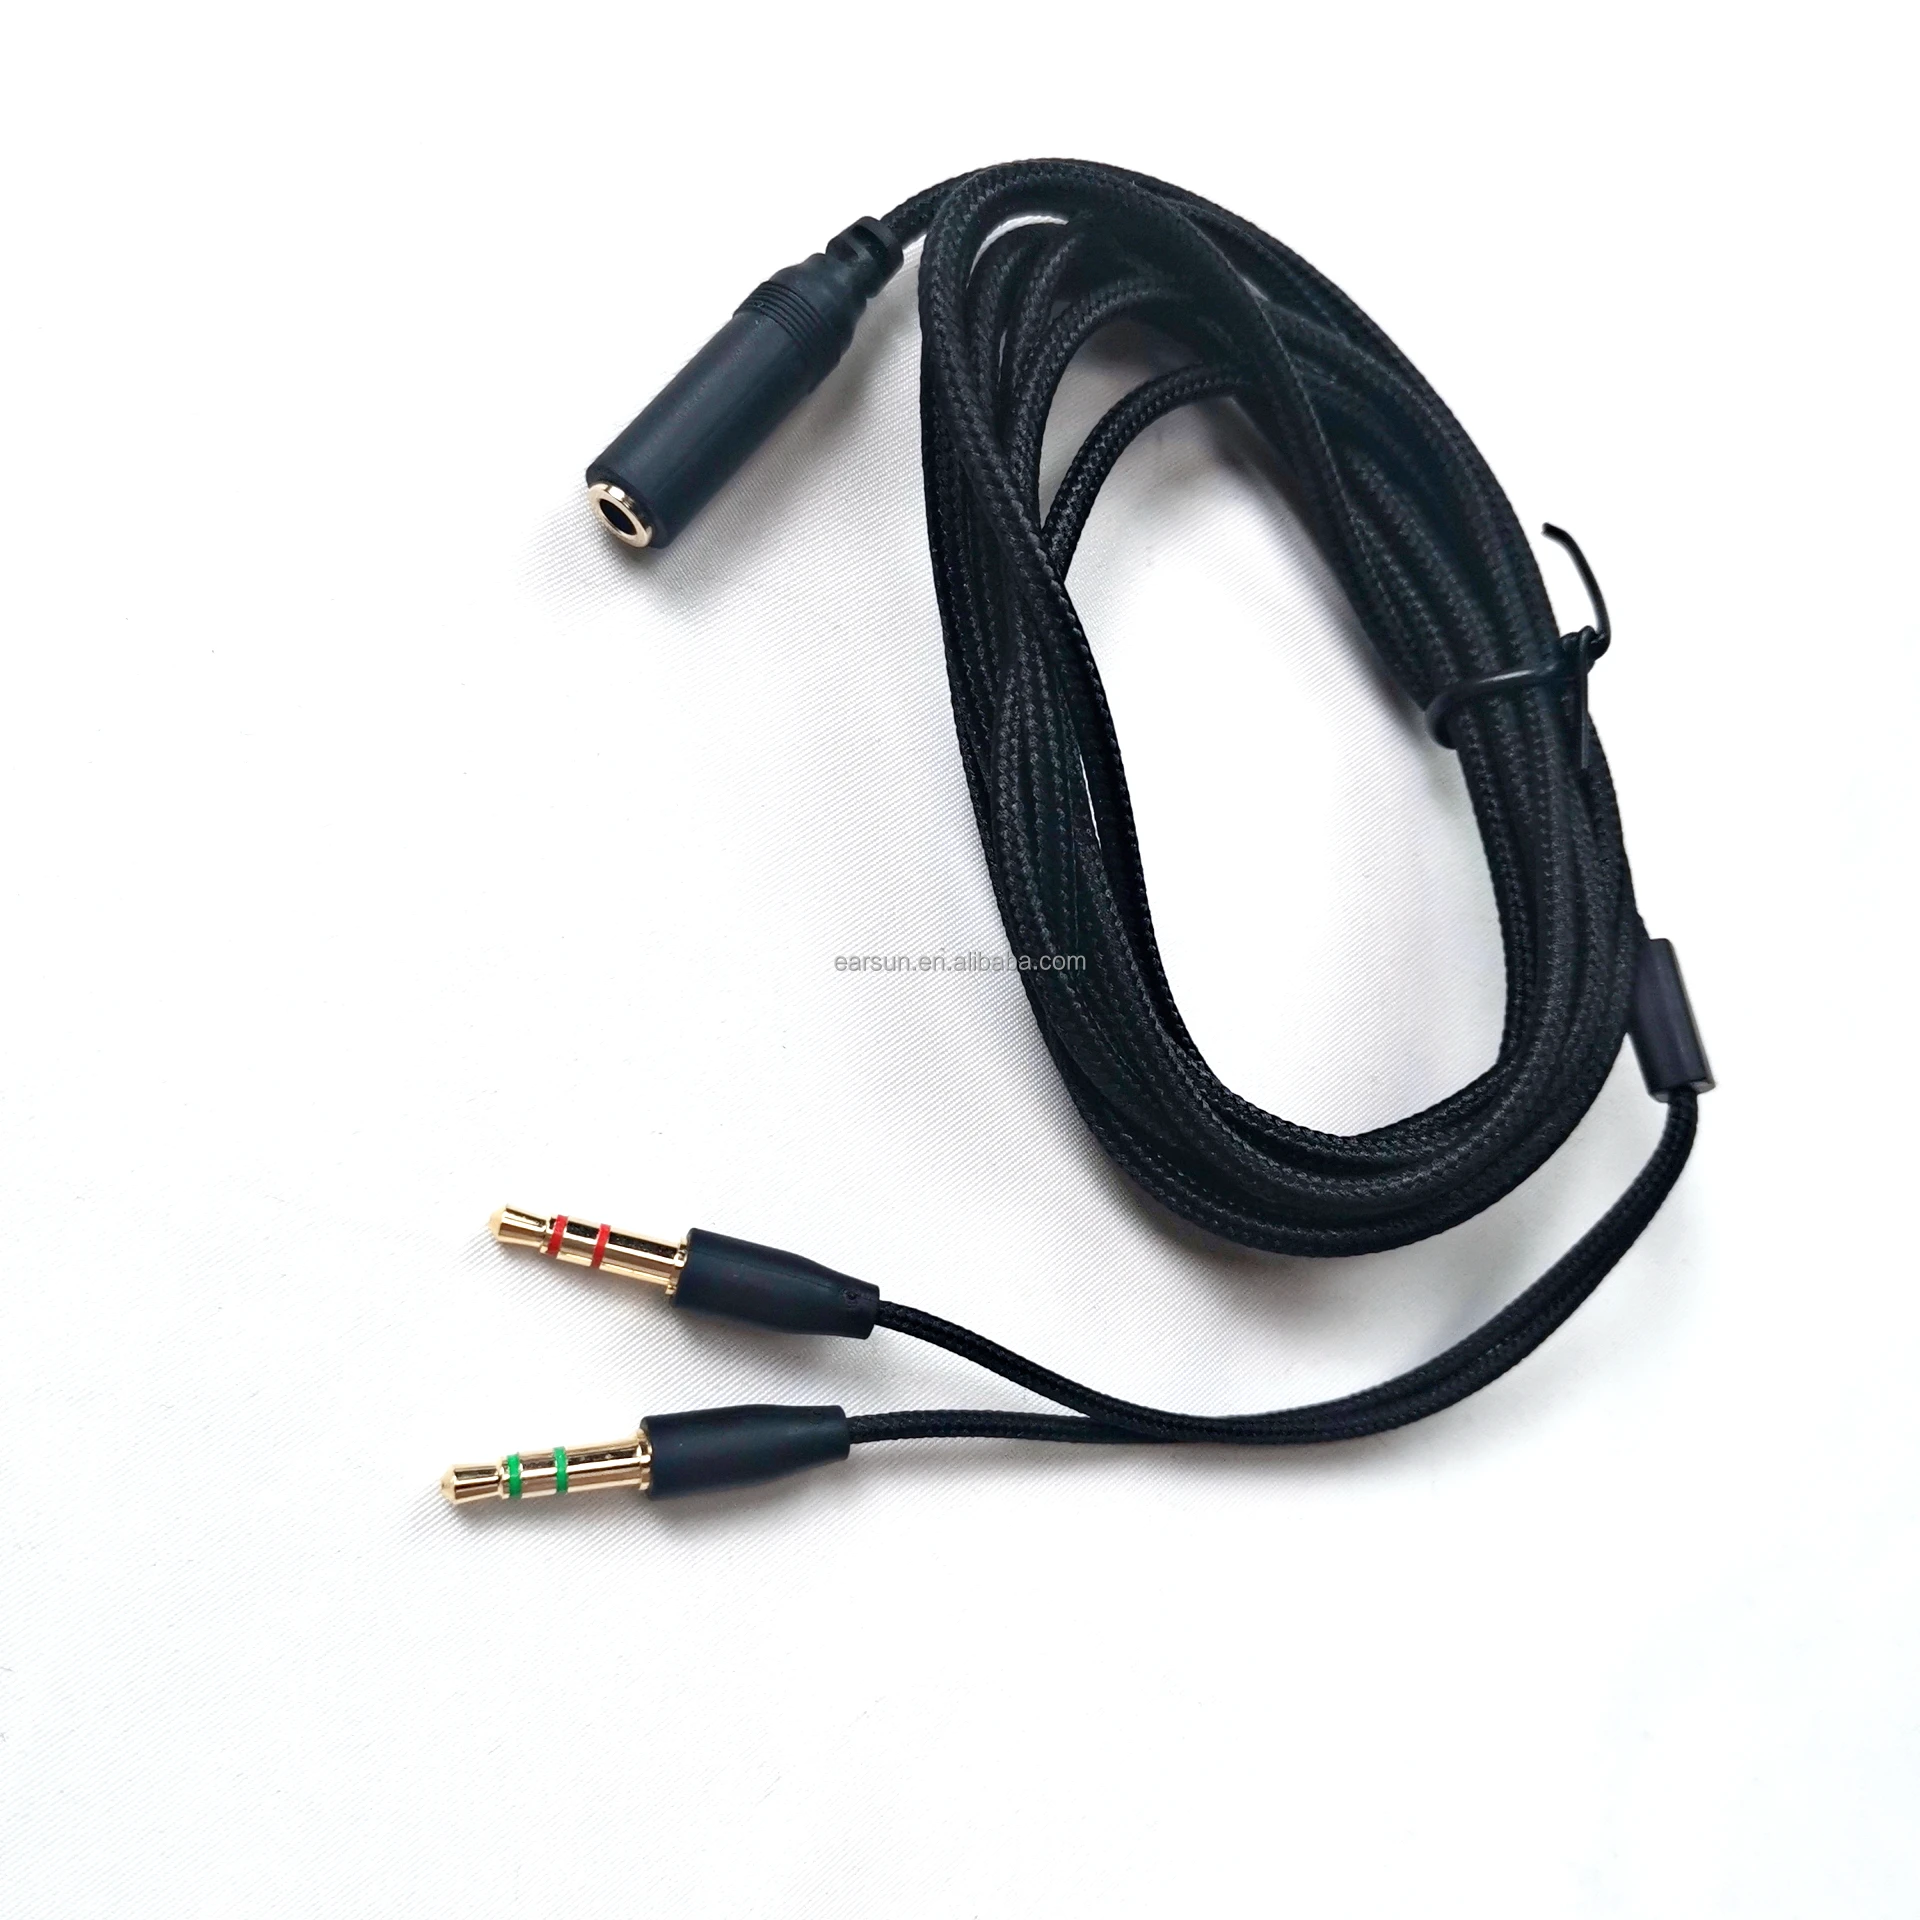 

3.5mm Universal 2 in 1 Gaming Headset Audio- Extend Cable For Hyper X Cloud II/Alpha-/Cloud Flight/Core Headphone, Black